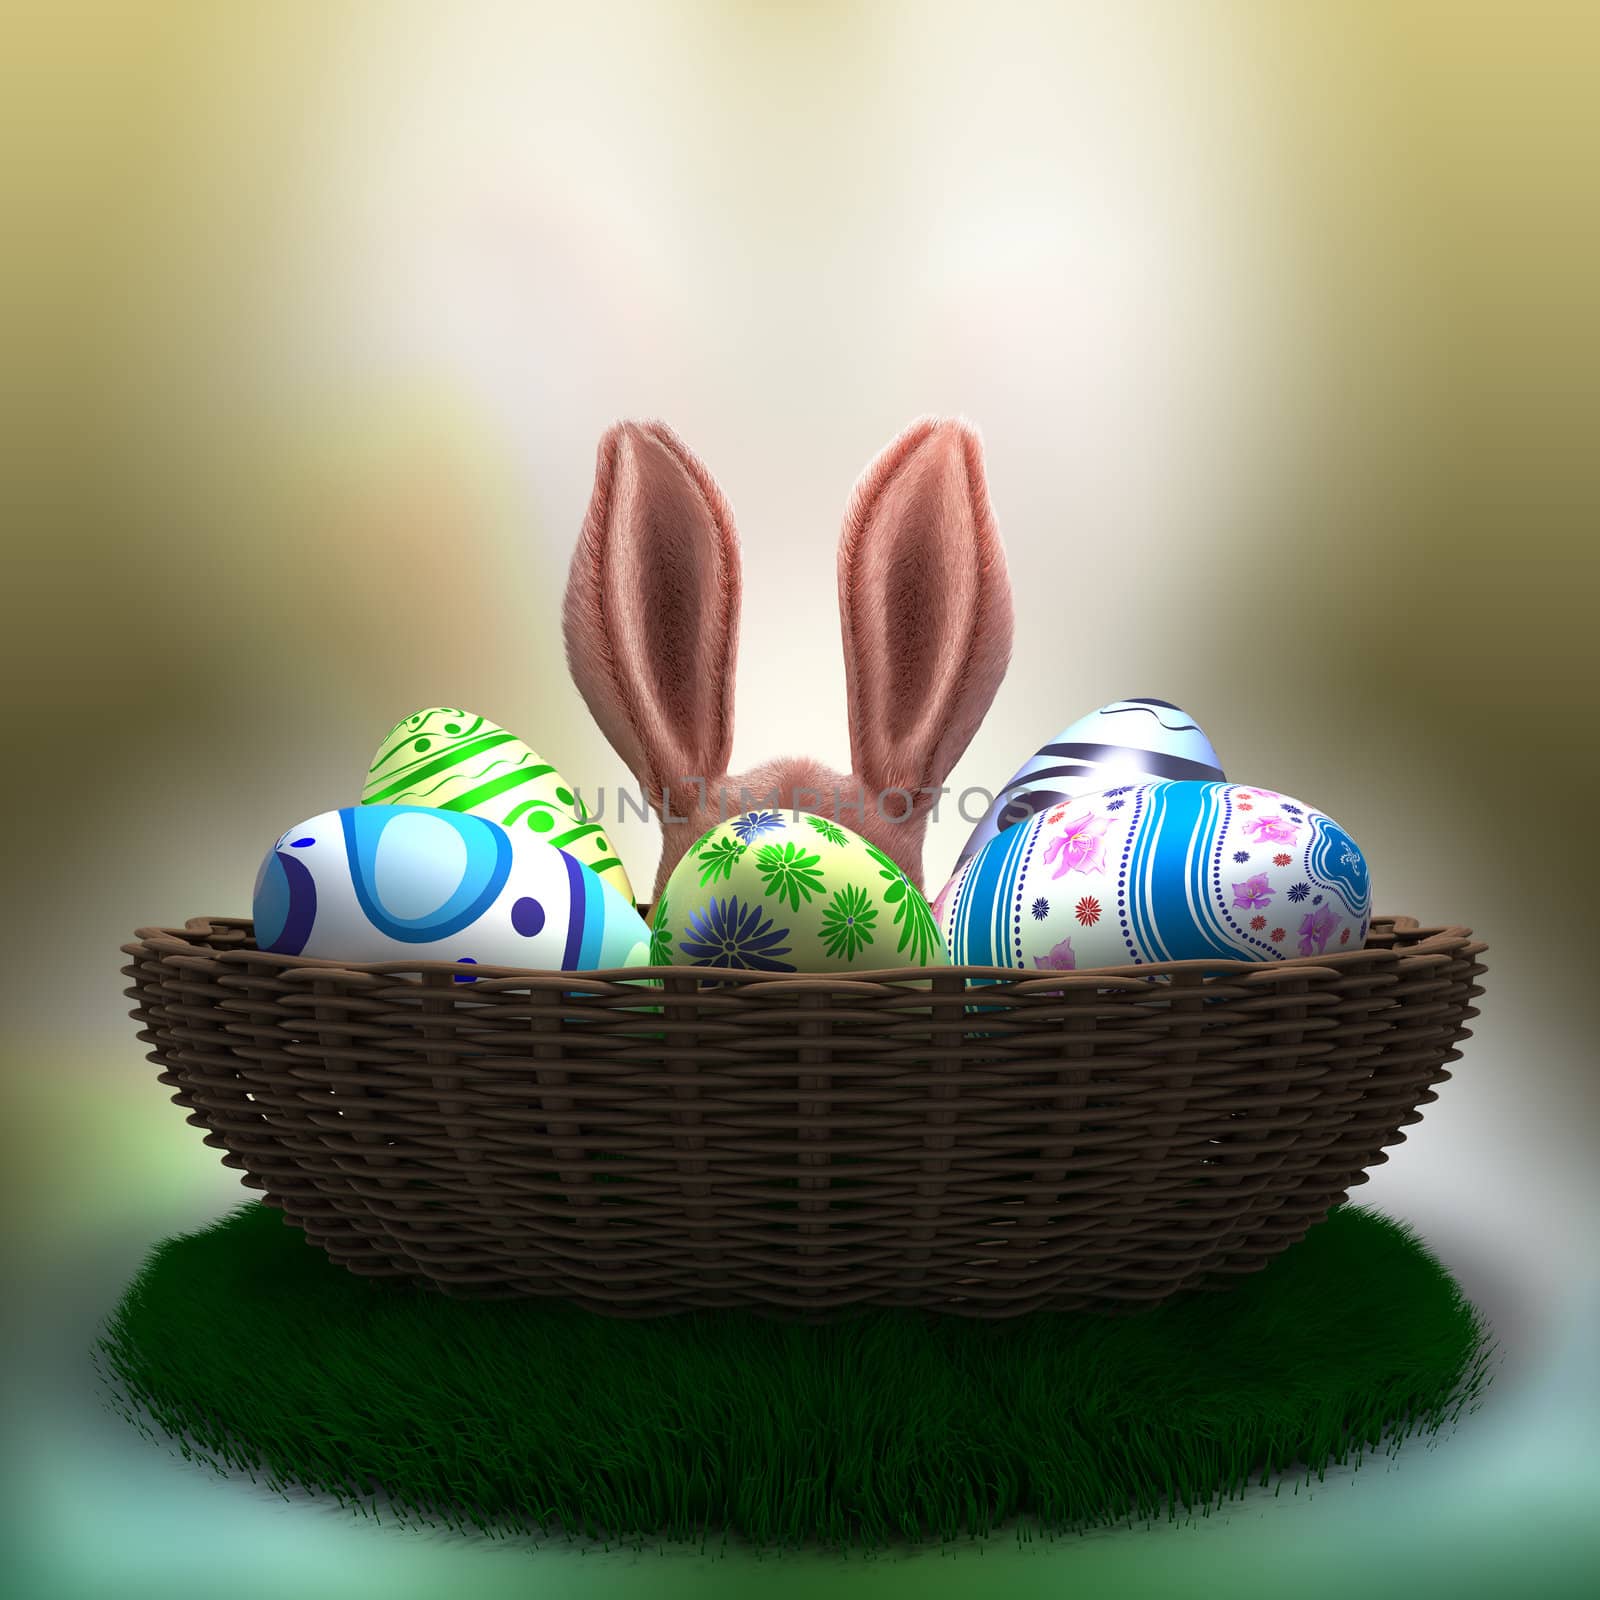 decorated Easter eggs on the grass in basket with Easter Bunny ears